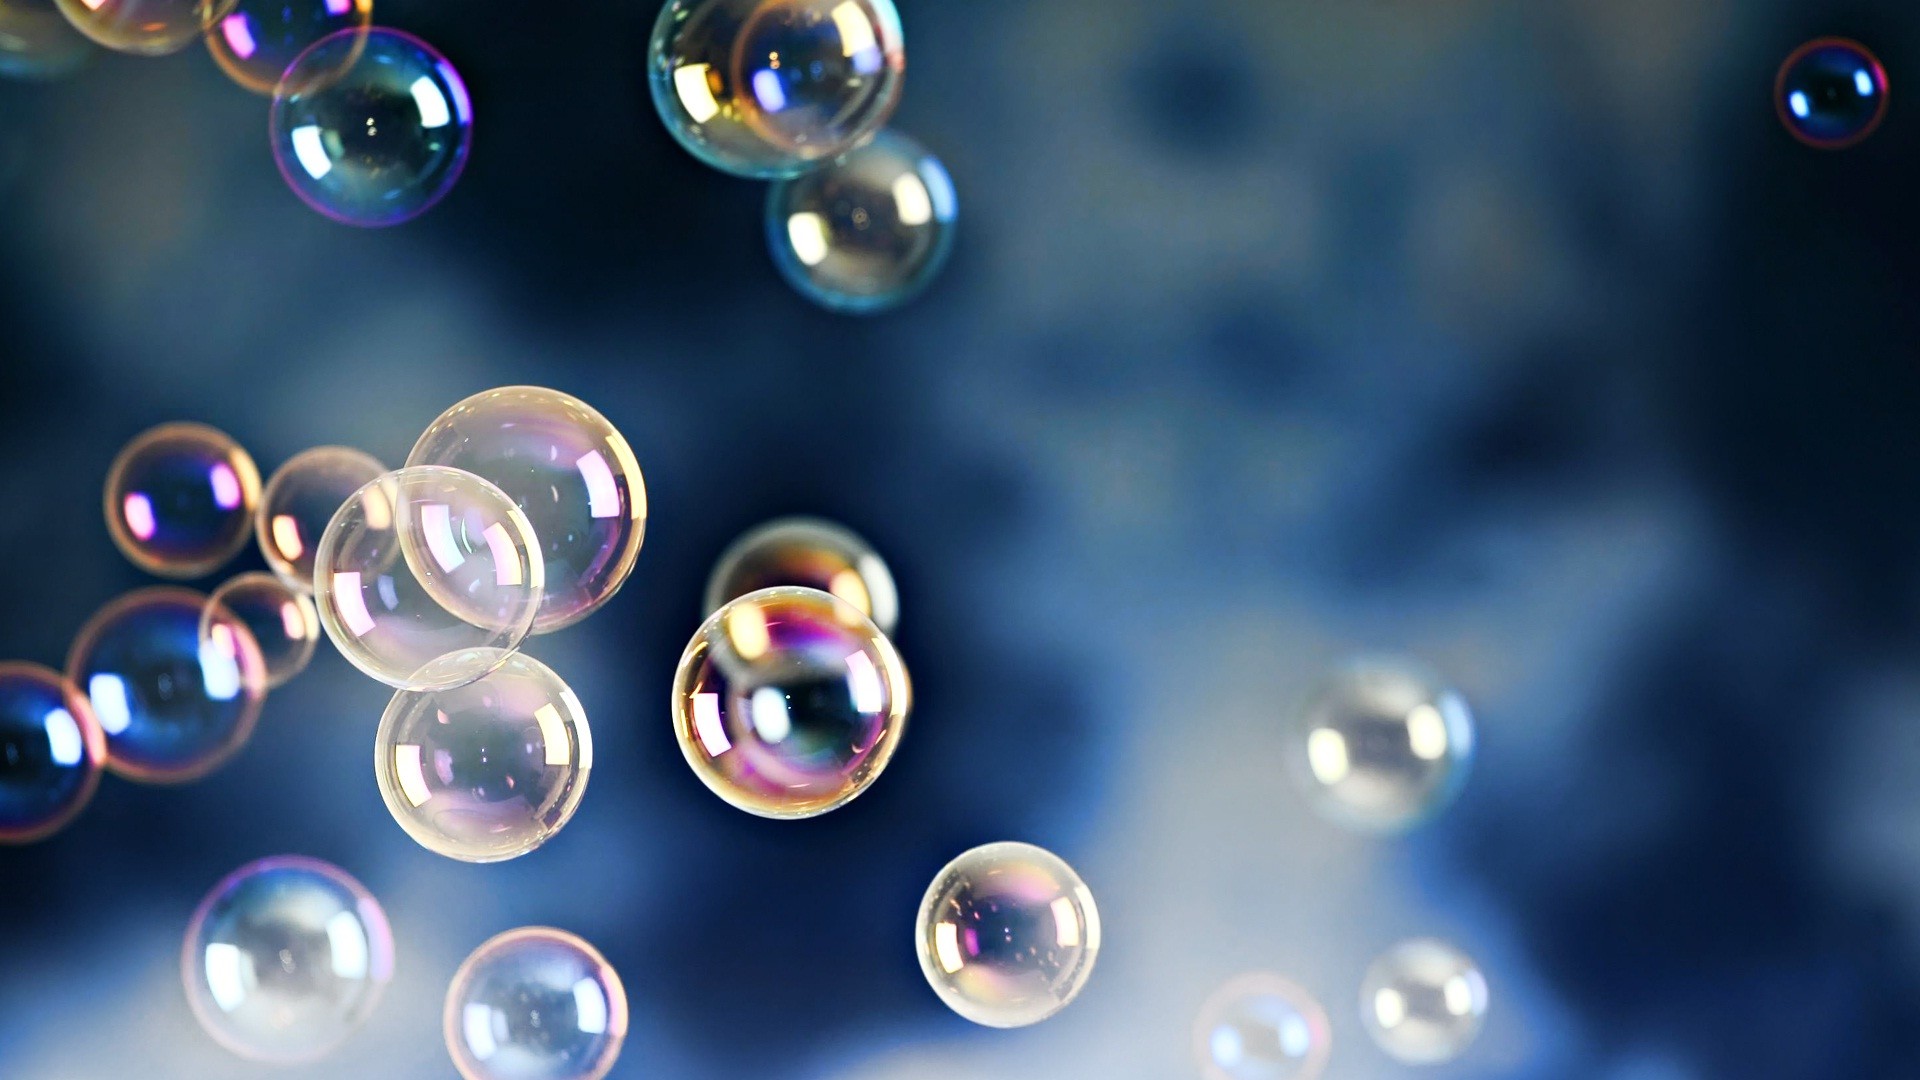 1920x1080 Bubbles theme computer background wallpapers